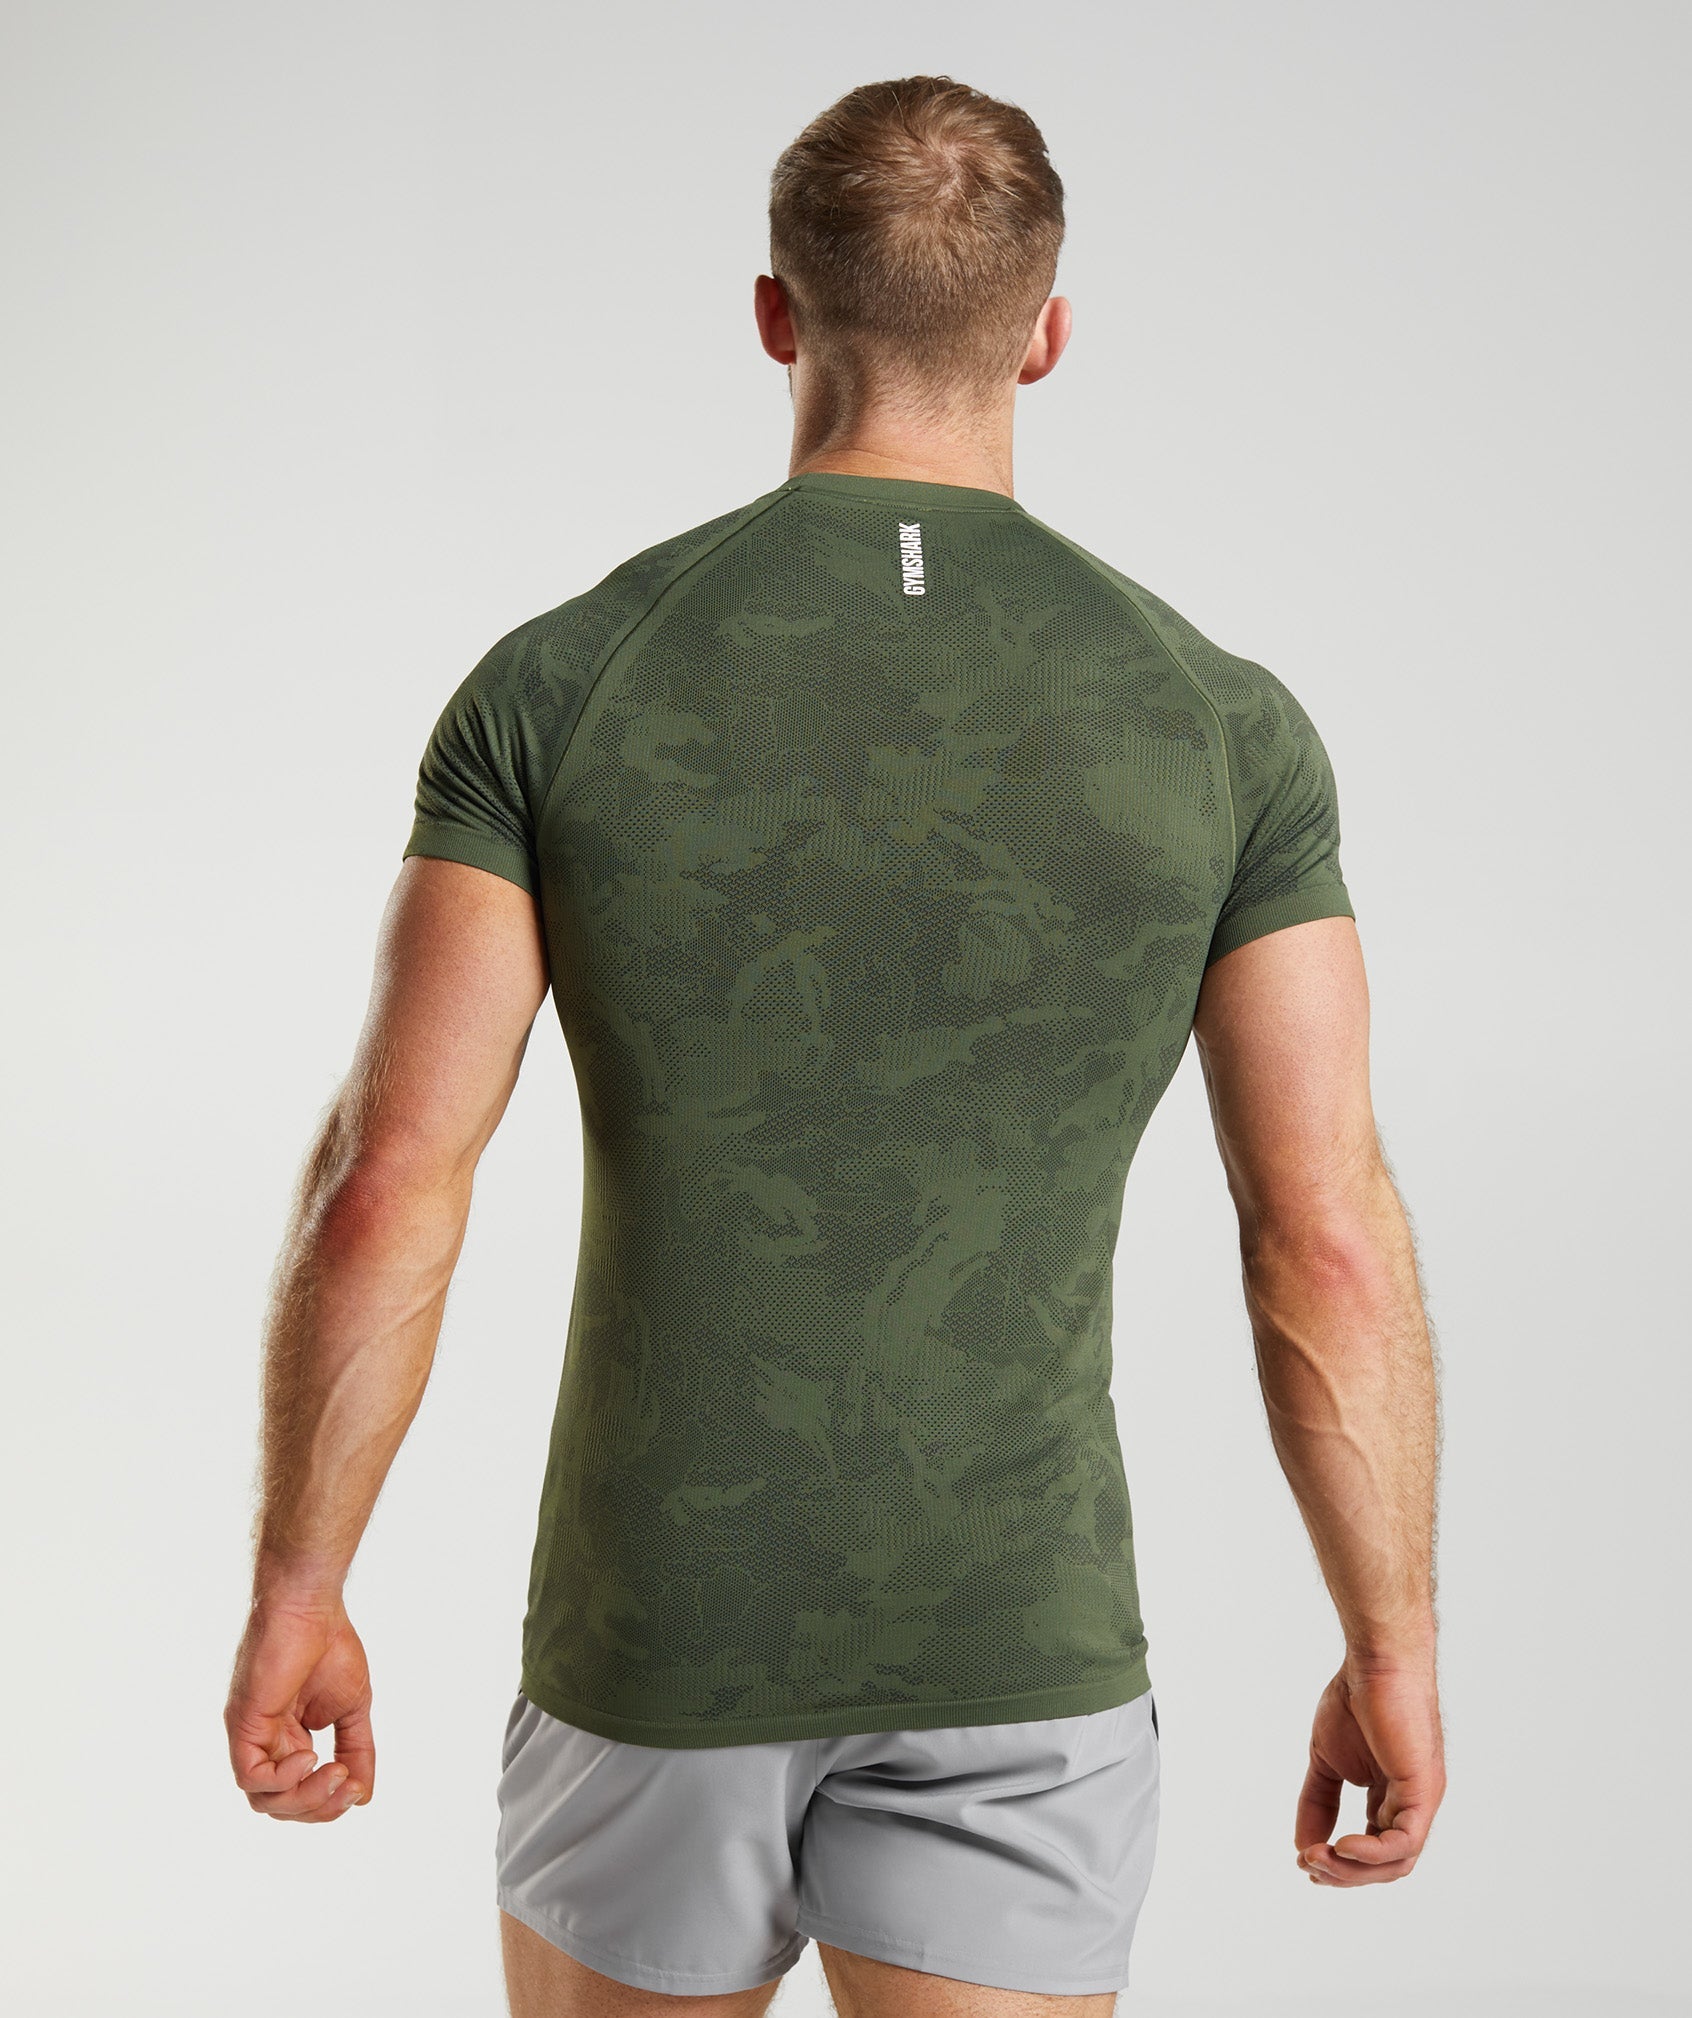 Geo Seamless T-Shirt in Core Olive/Black - view 2